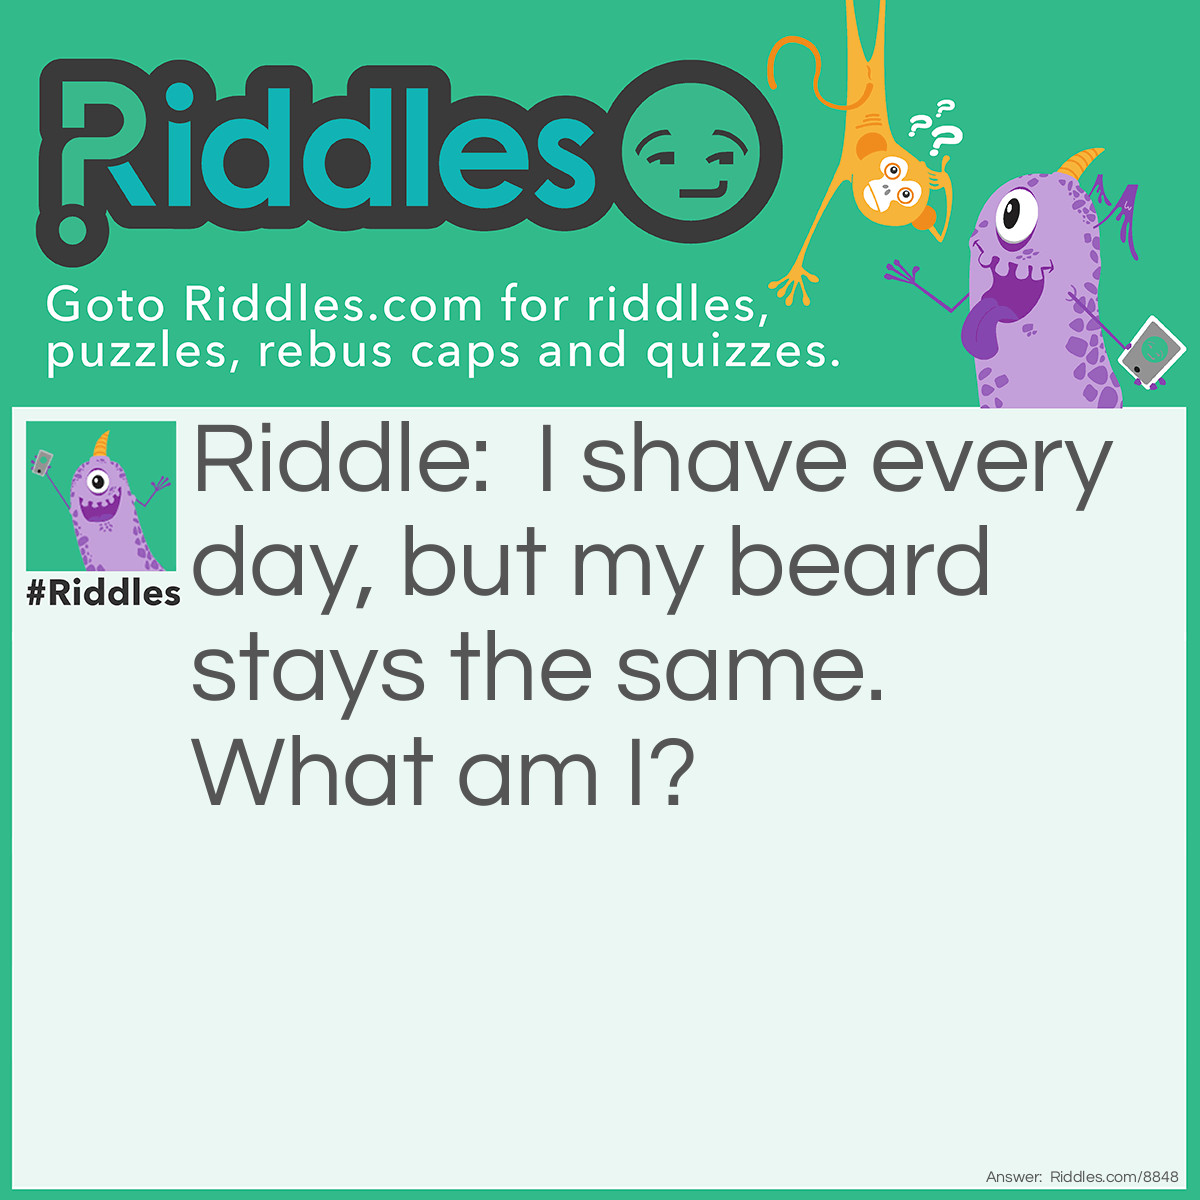 Riddle: I shave every day, but my beard stays the same. What am I? Answer: A barber.